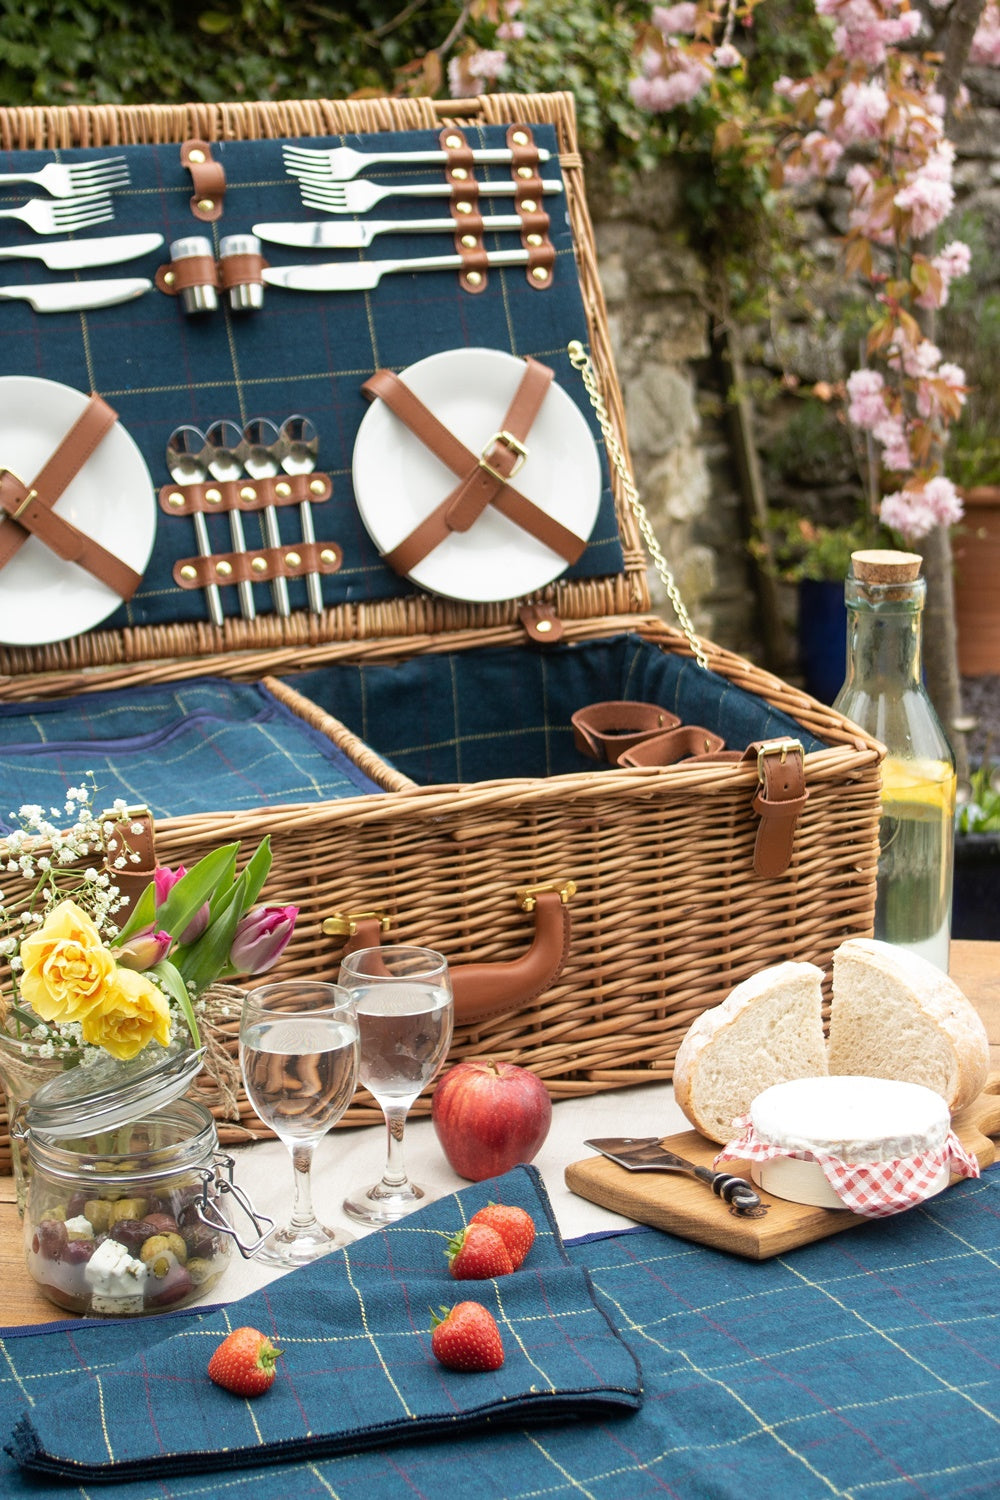 Blue Tweed Fitted Wicker Picnic Basket